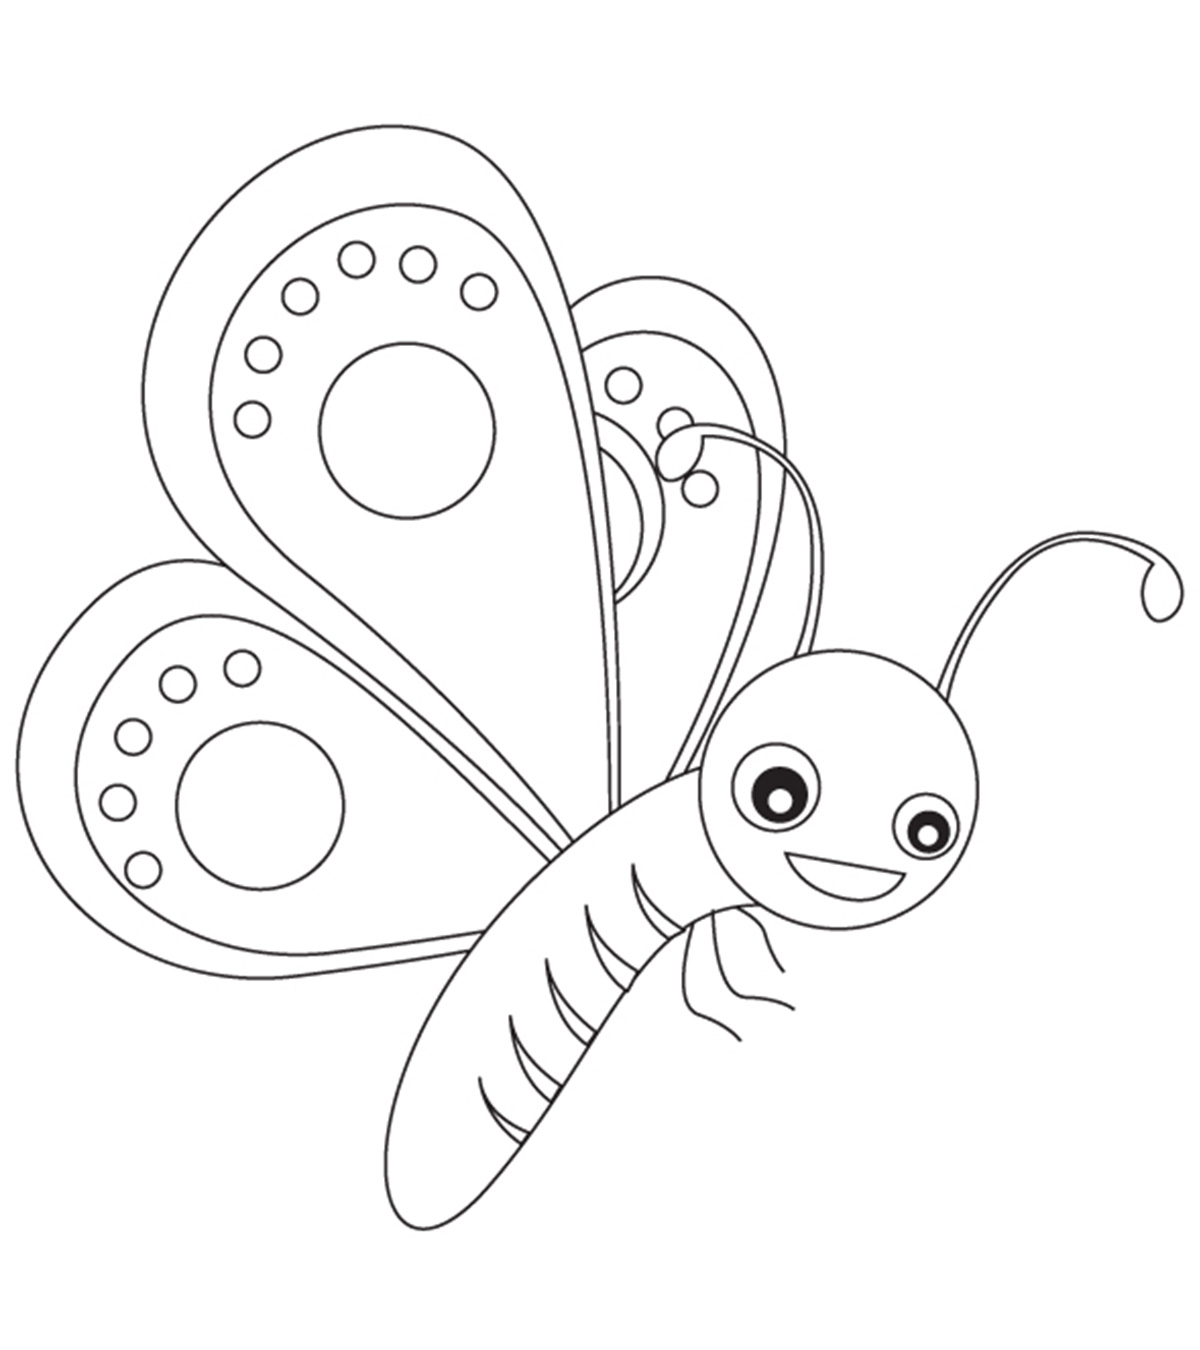 Cartoon Butterflies Coloring Pages Top 50 Free Printable Butterfly Coloring Pages Online